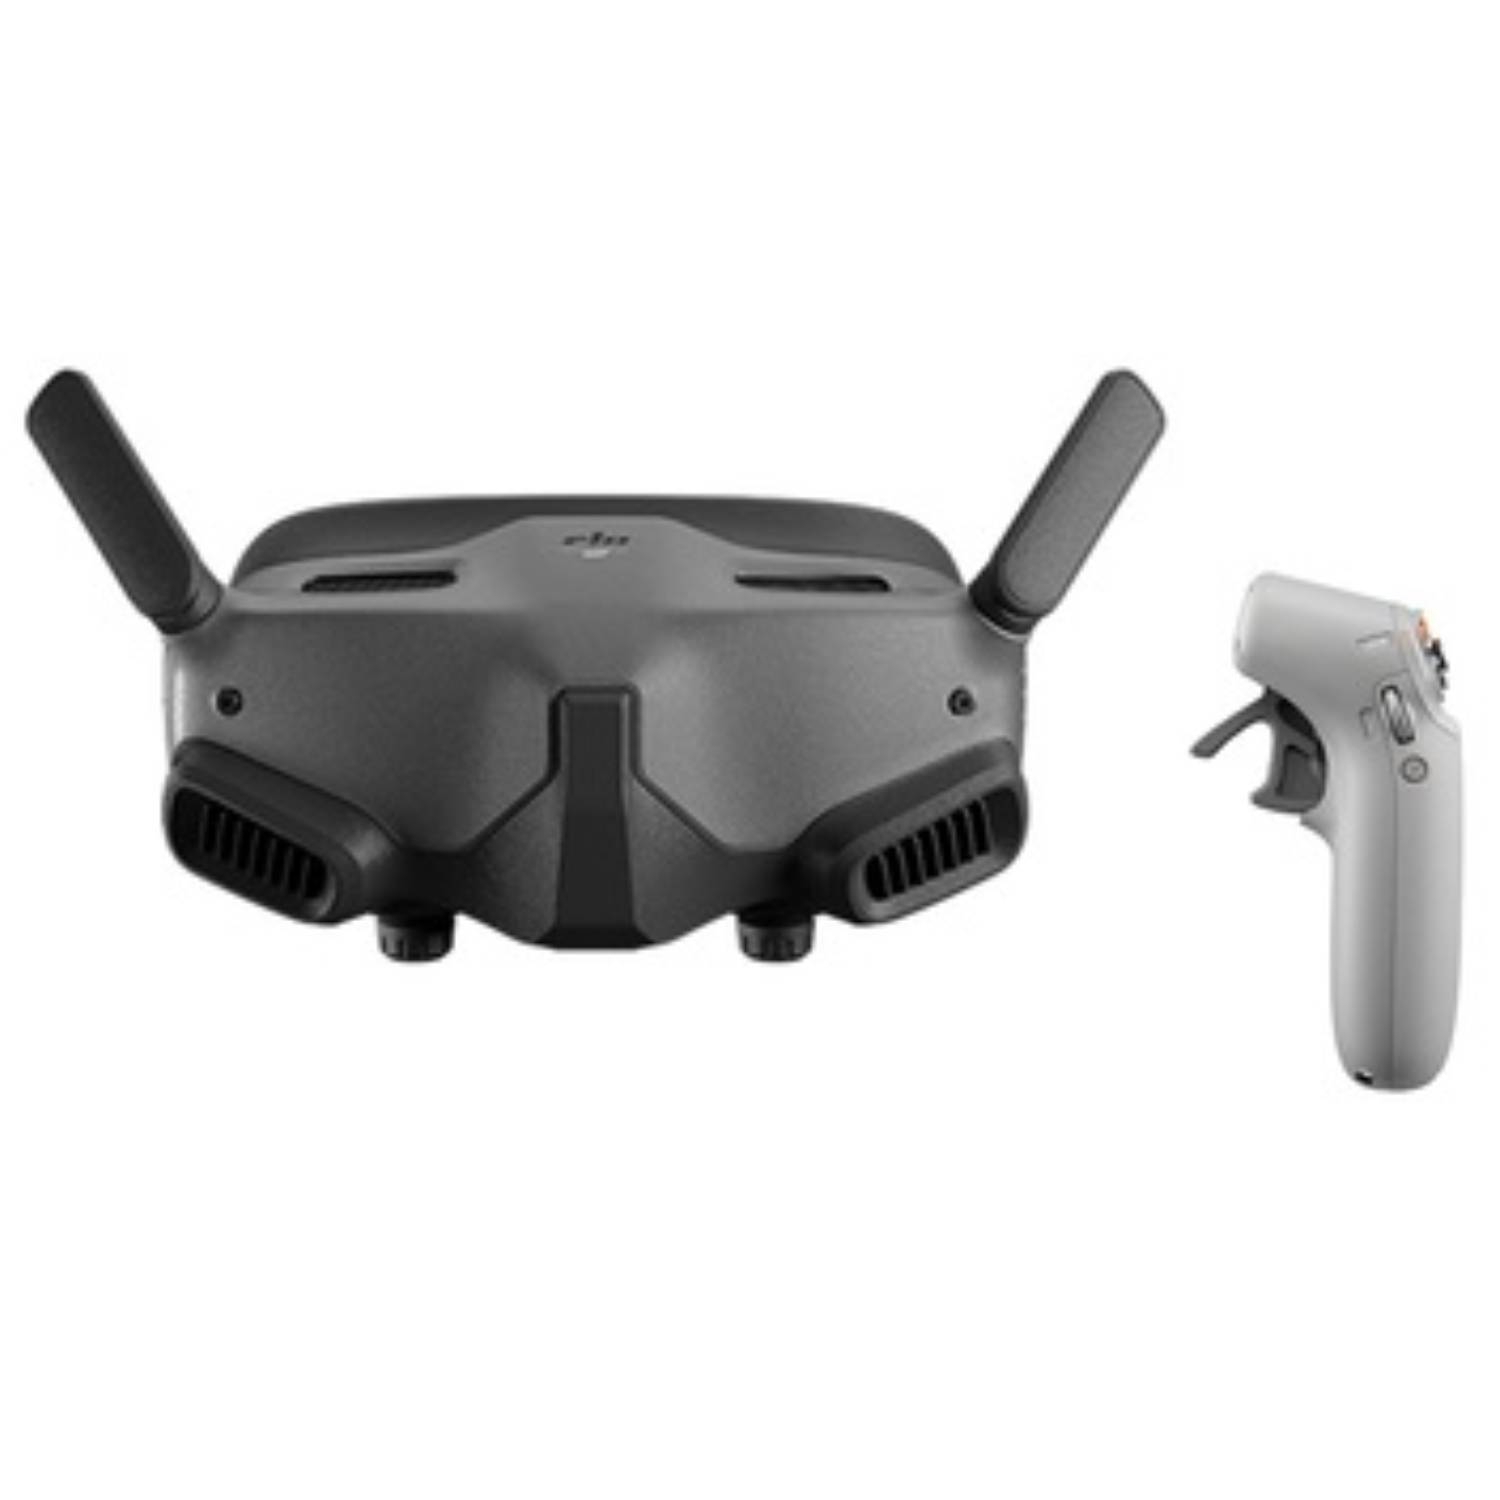 DJI Goggles 2 Motion Combo + RC Motion 2 + VR Brille + Controller